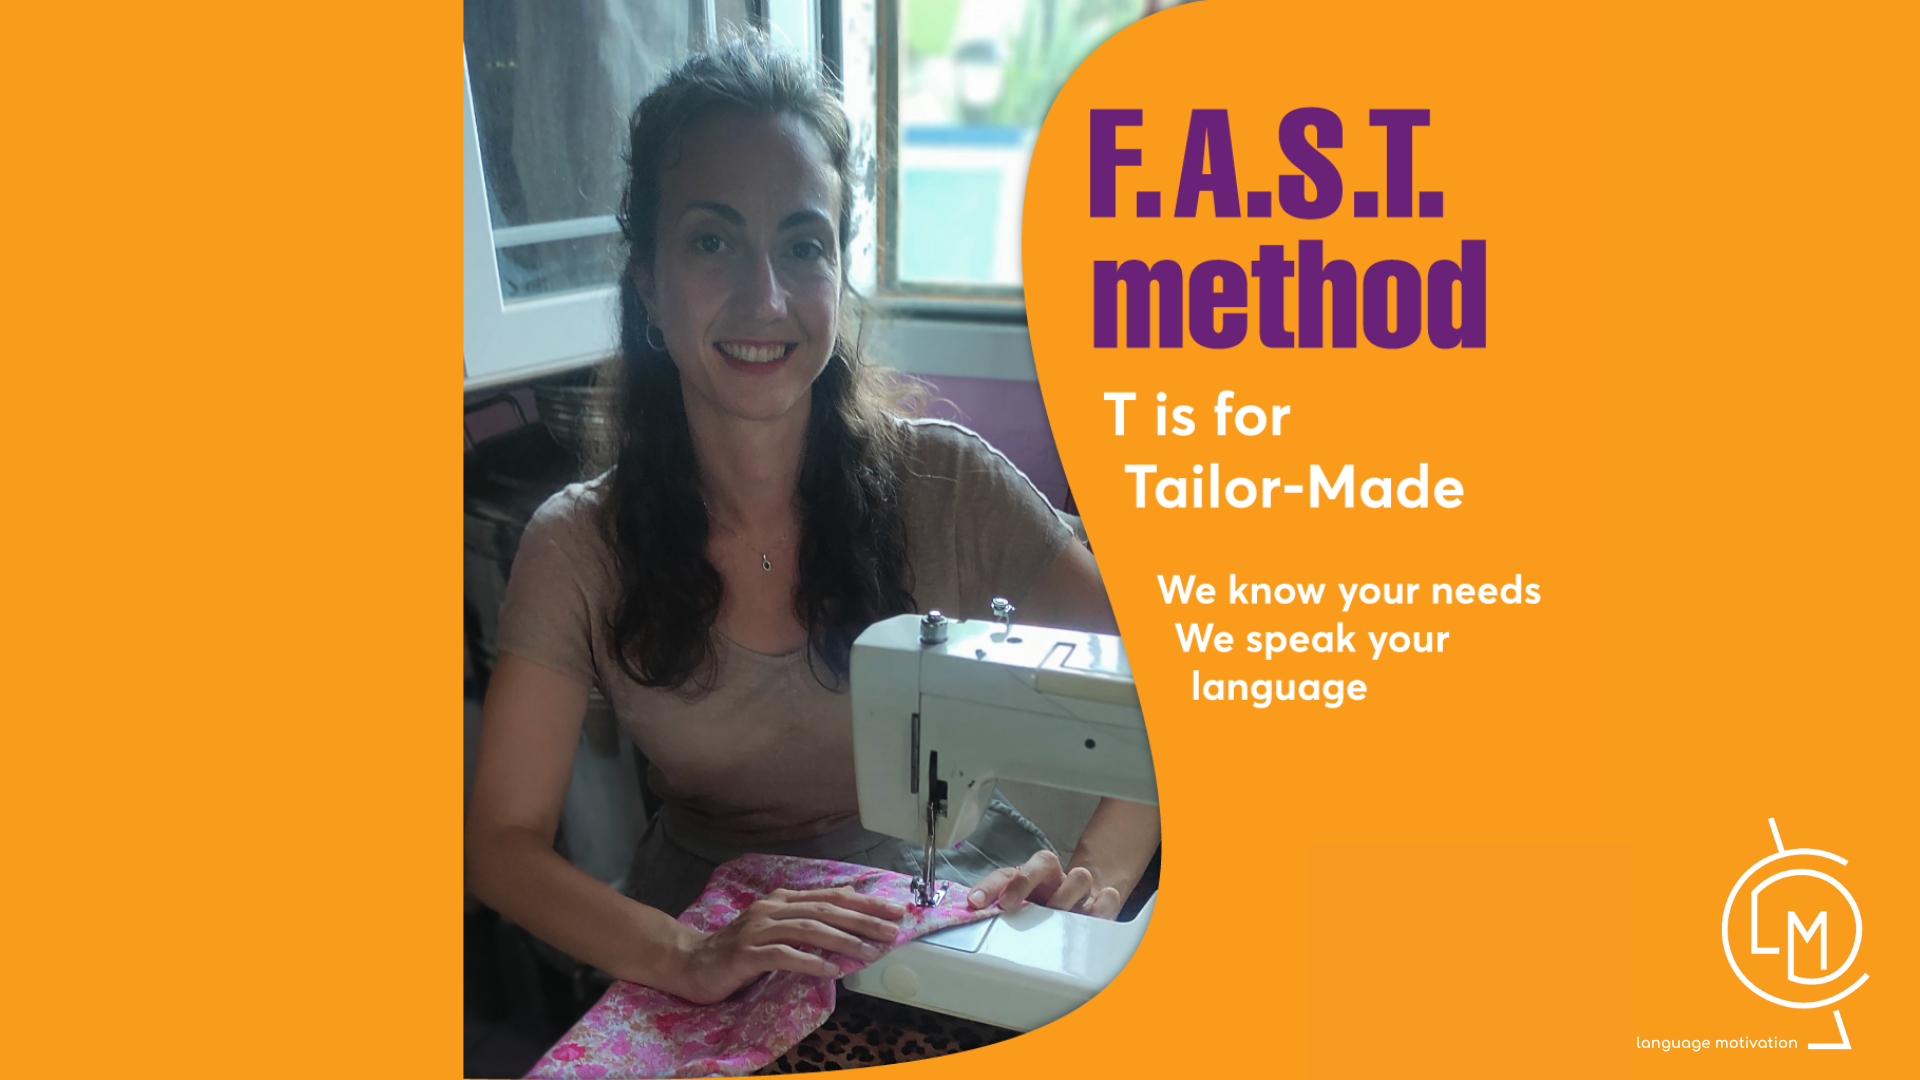 The F.A.S.T. method is Tailor-made